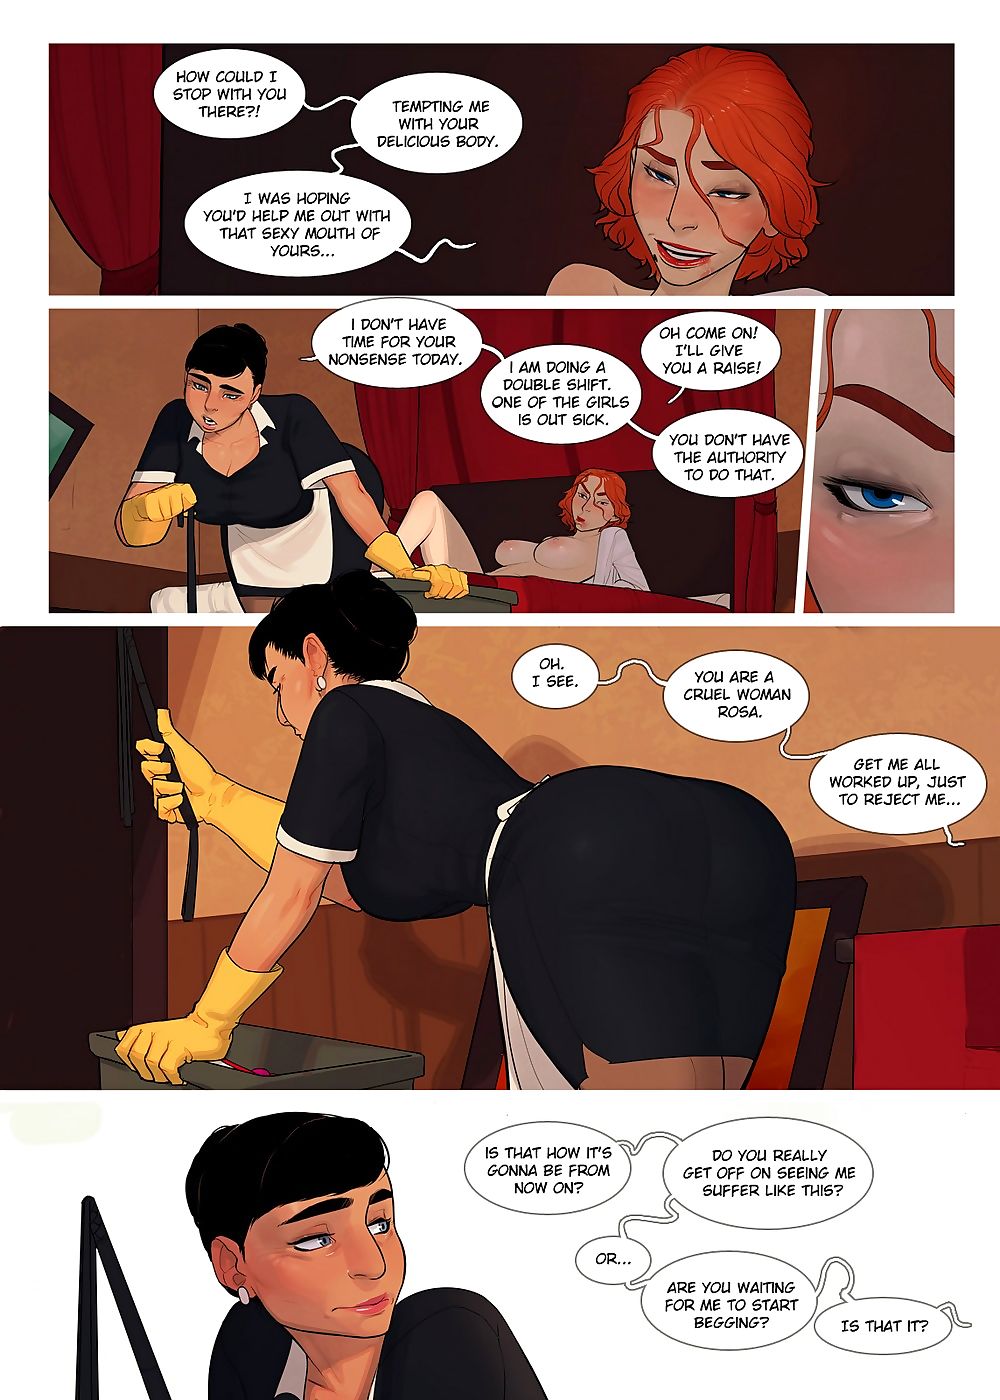 InCase- The Mess 1 & 2 page 1